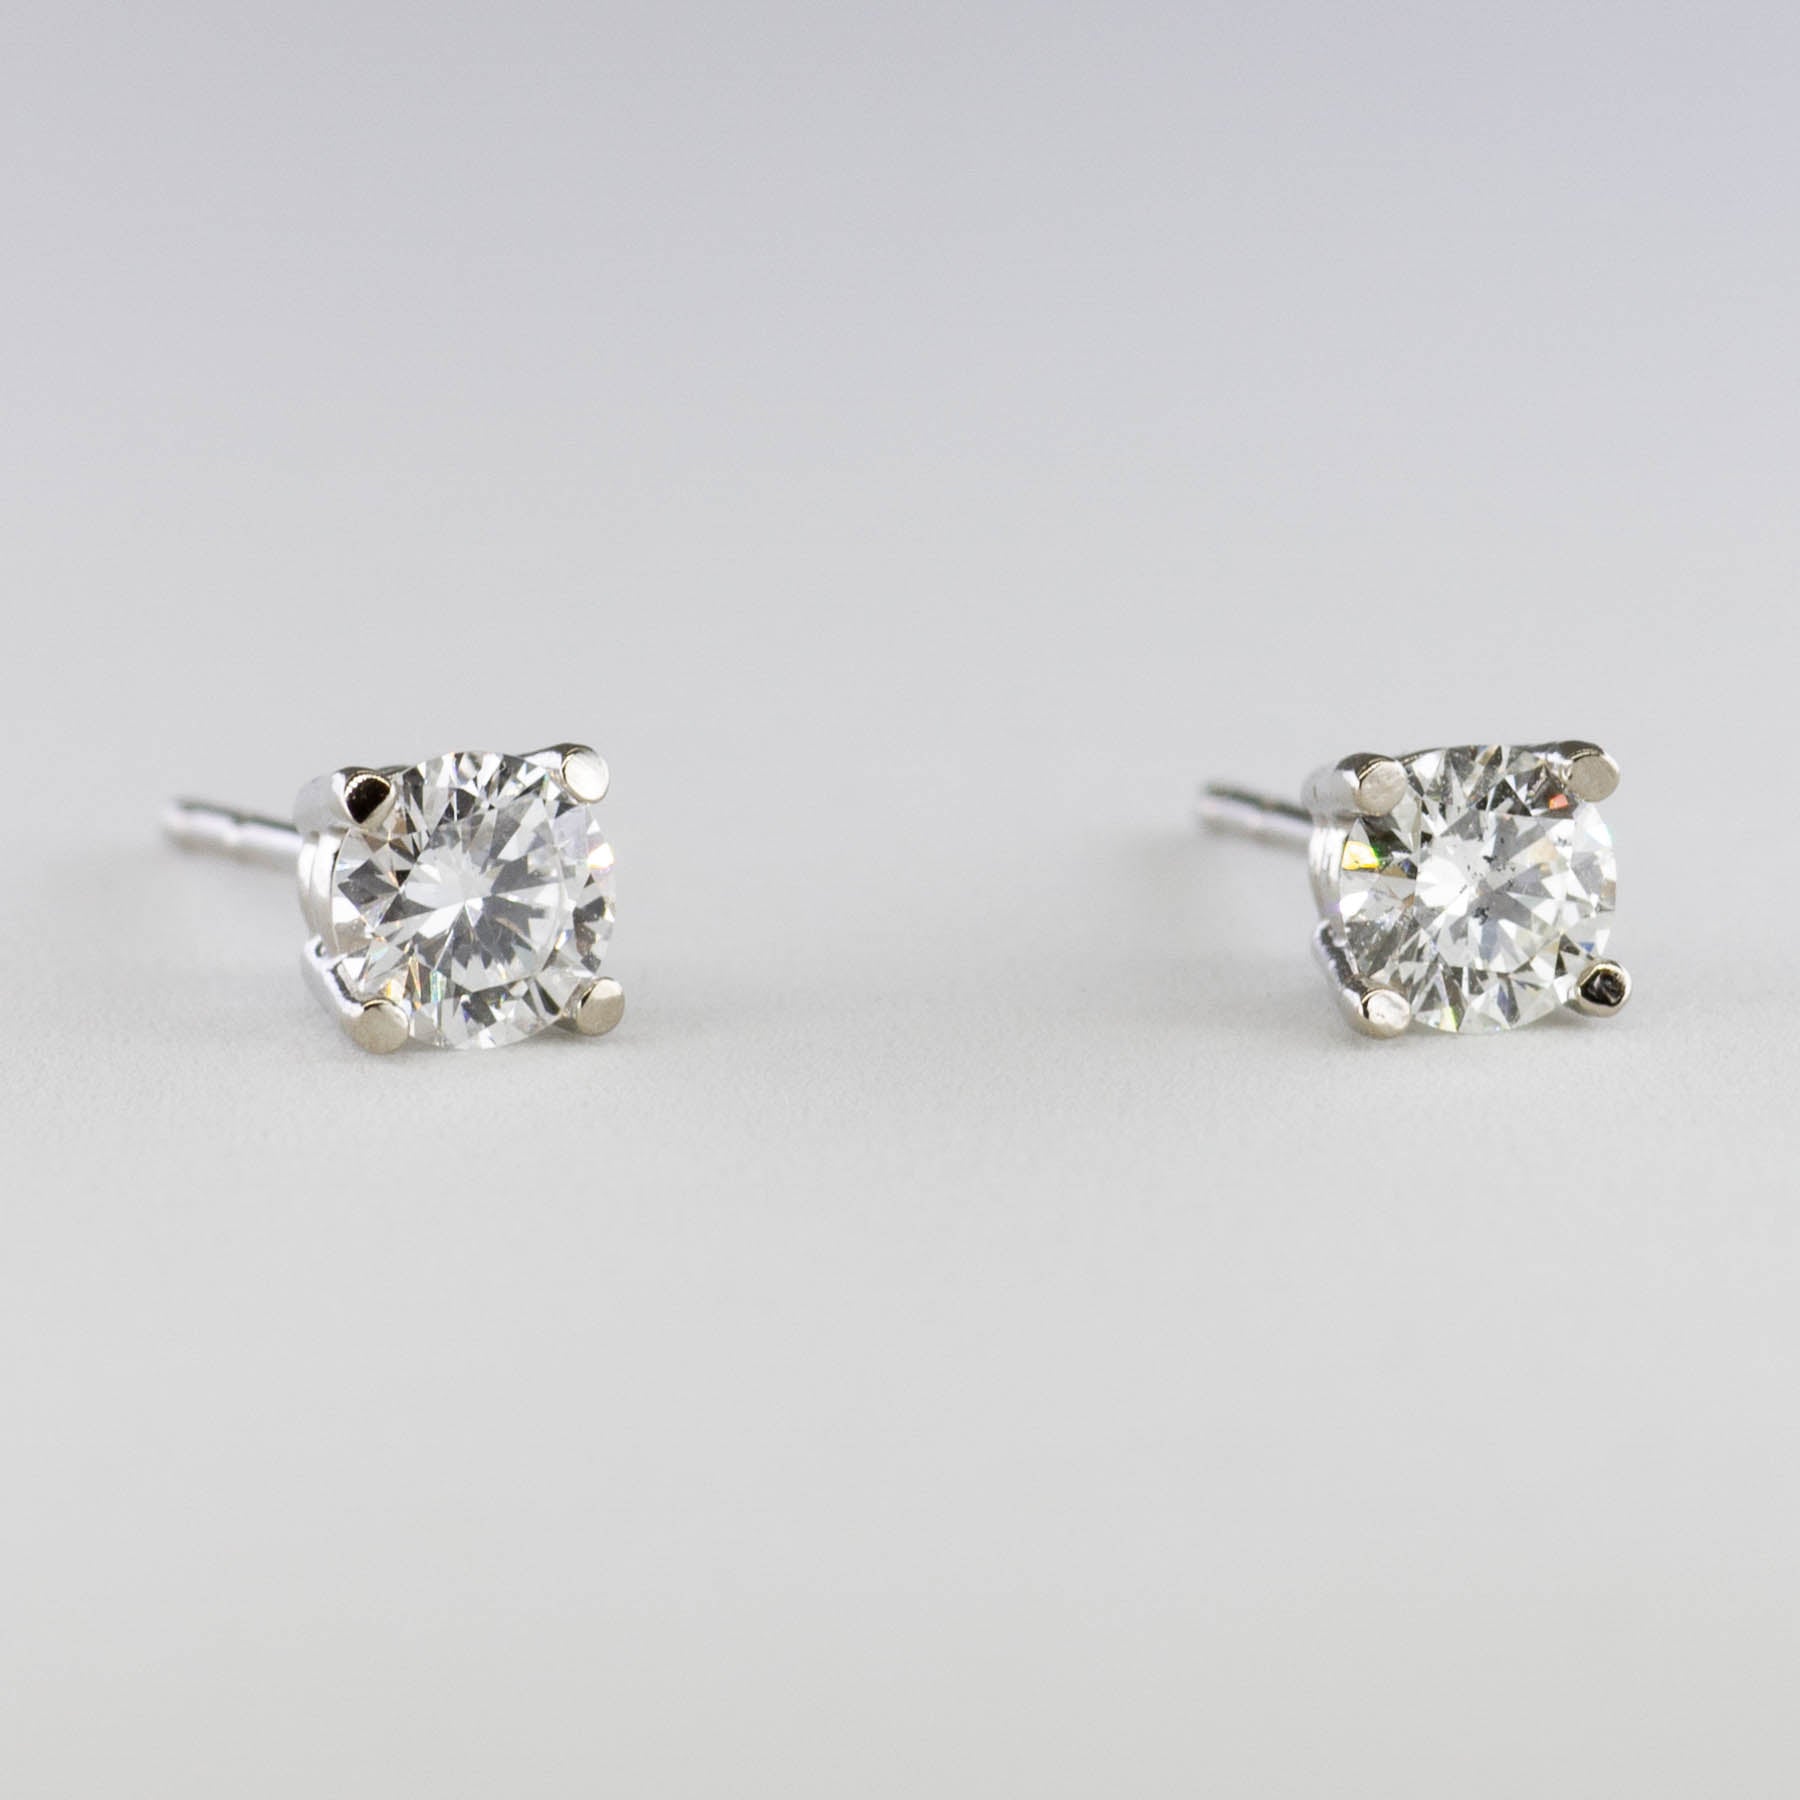 '100 Ways' White Gold Diamond Studs | 1/2 carat | H Colour, Clarity Options Available | - 100 Ways